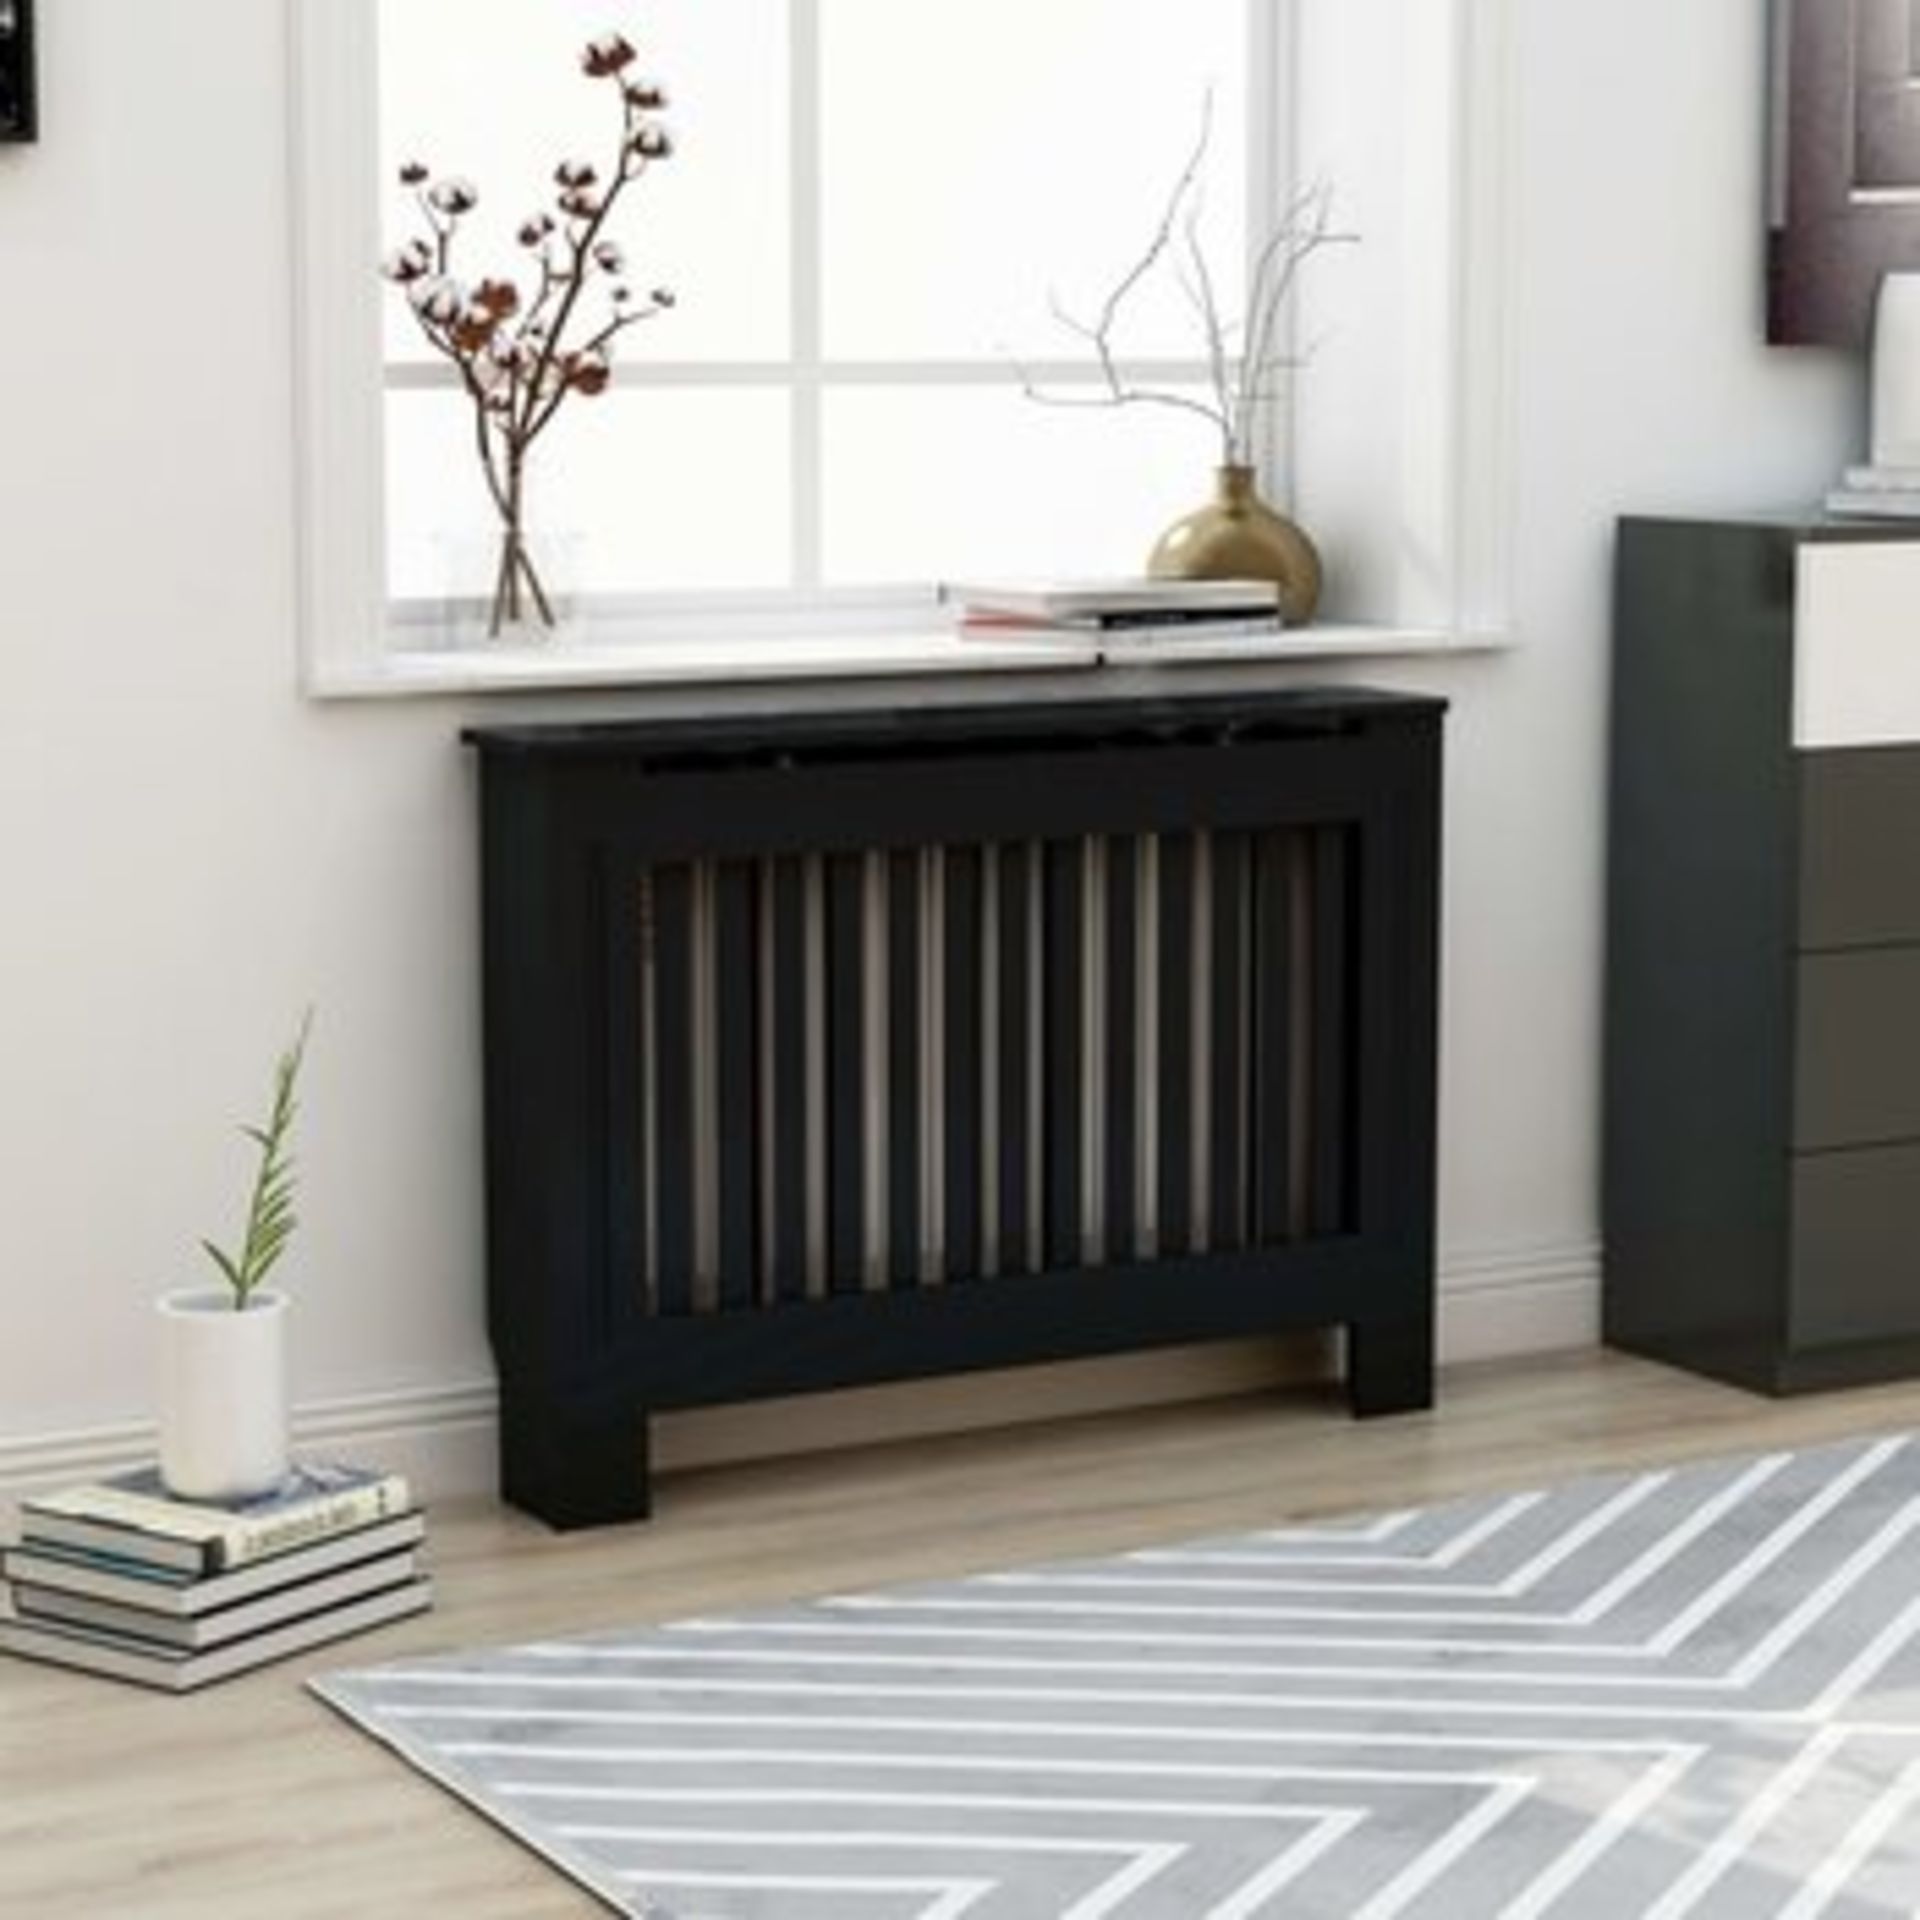 BOXED JAYLYNN MEDIUM RADIATOR COVER IN BLACK RRP £92.42Condition ReportAppraisal Available on